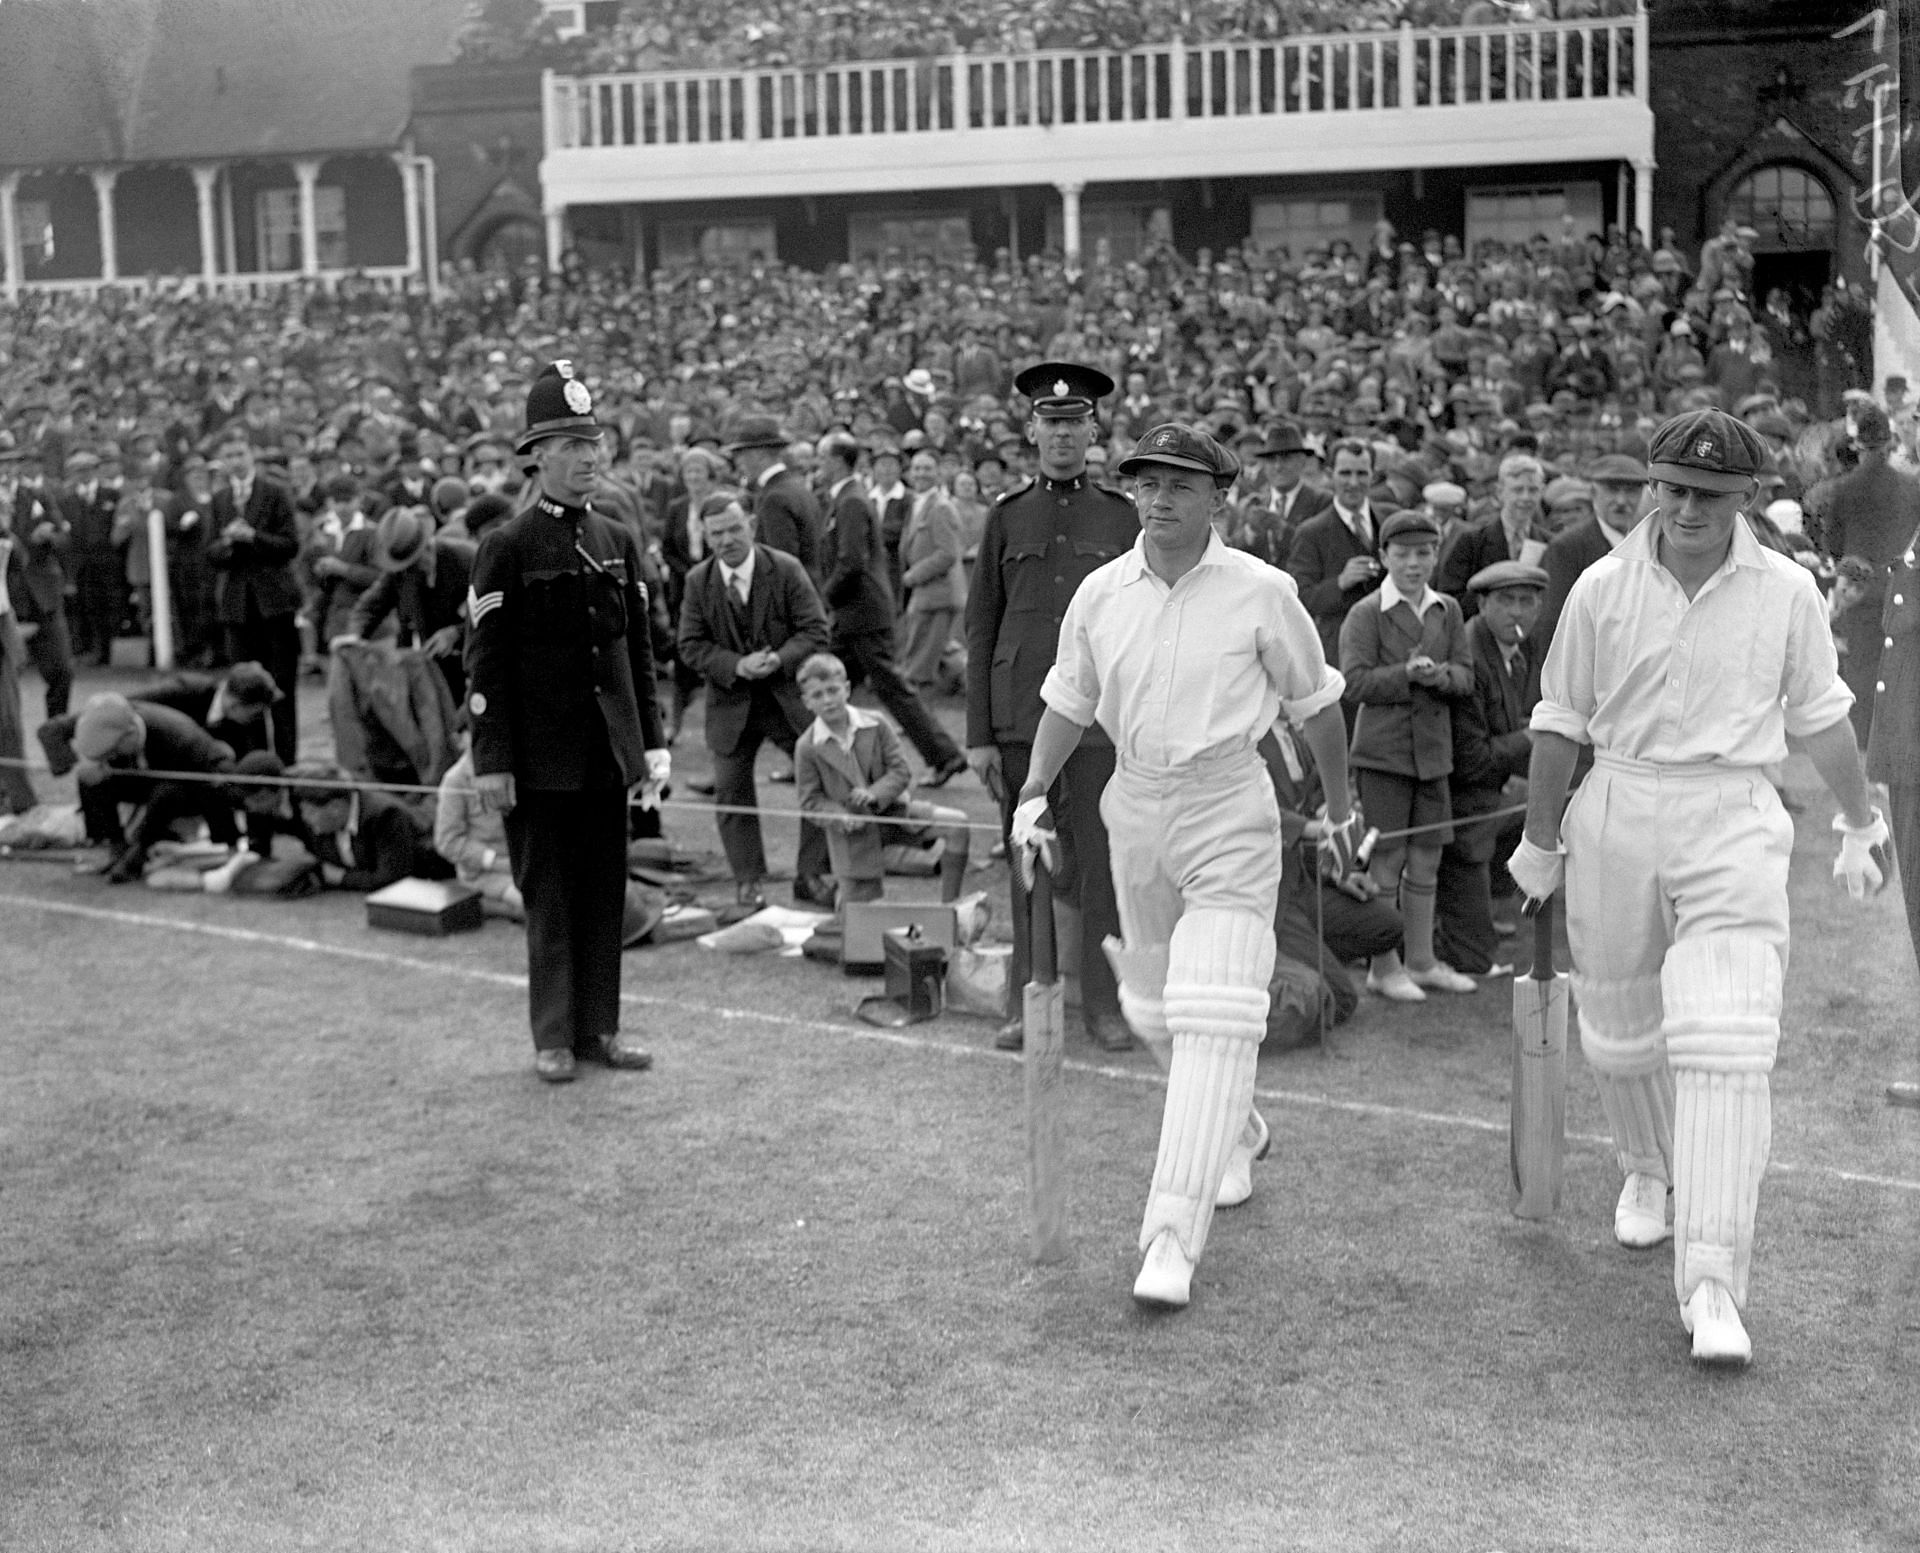 Stan McCabe (right) walking out to bat with Don Bradman in the Leeds Test of 1930